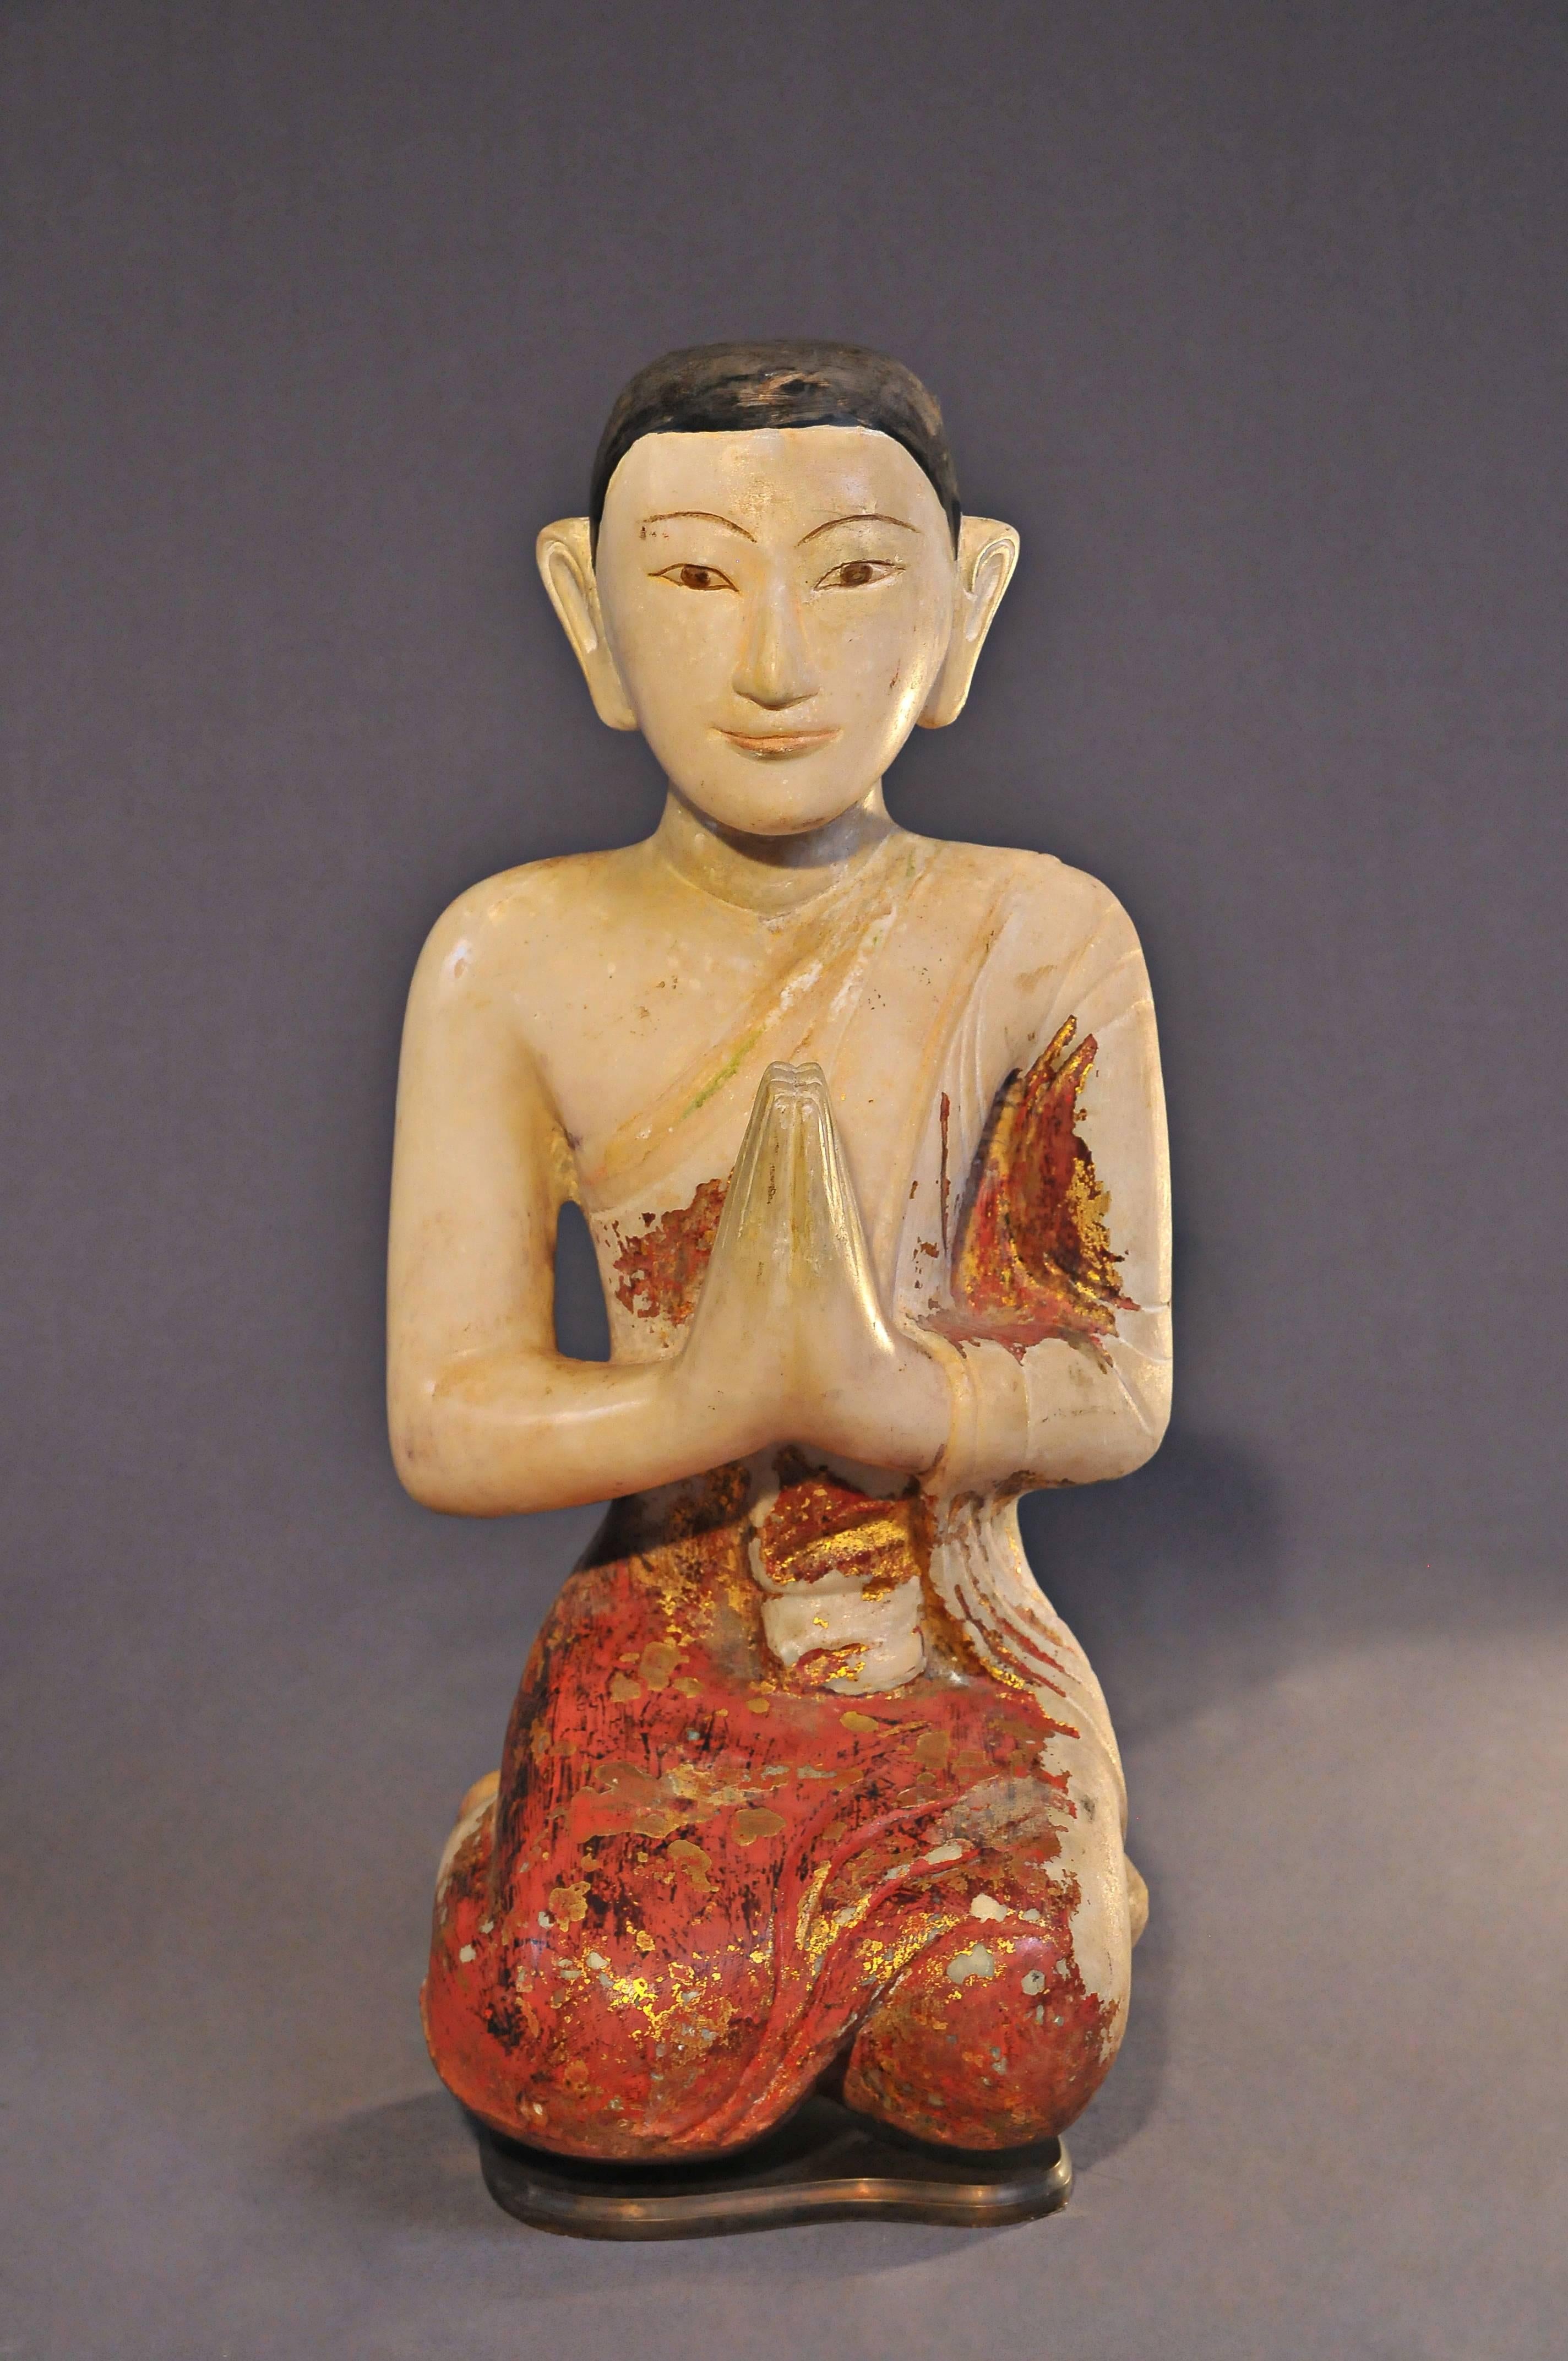 Mandalay, the centre of Buddhist universe in Myanmar, witnessed a prospered and fruitful period of Buddhist art. Impressed by a harmonious realism, these works are recommended by their astonishing movement and their natural expression. 

The monk